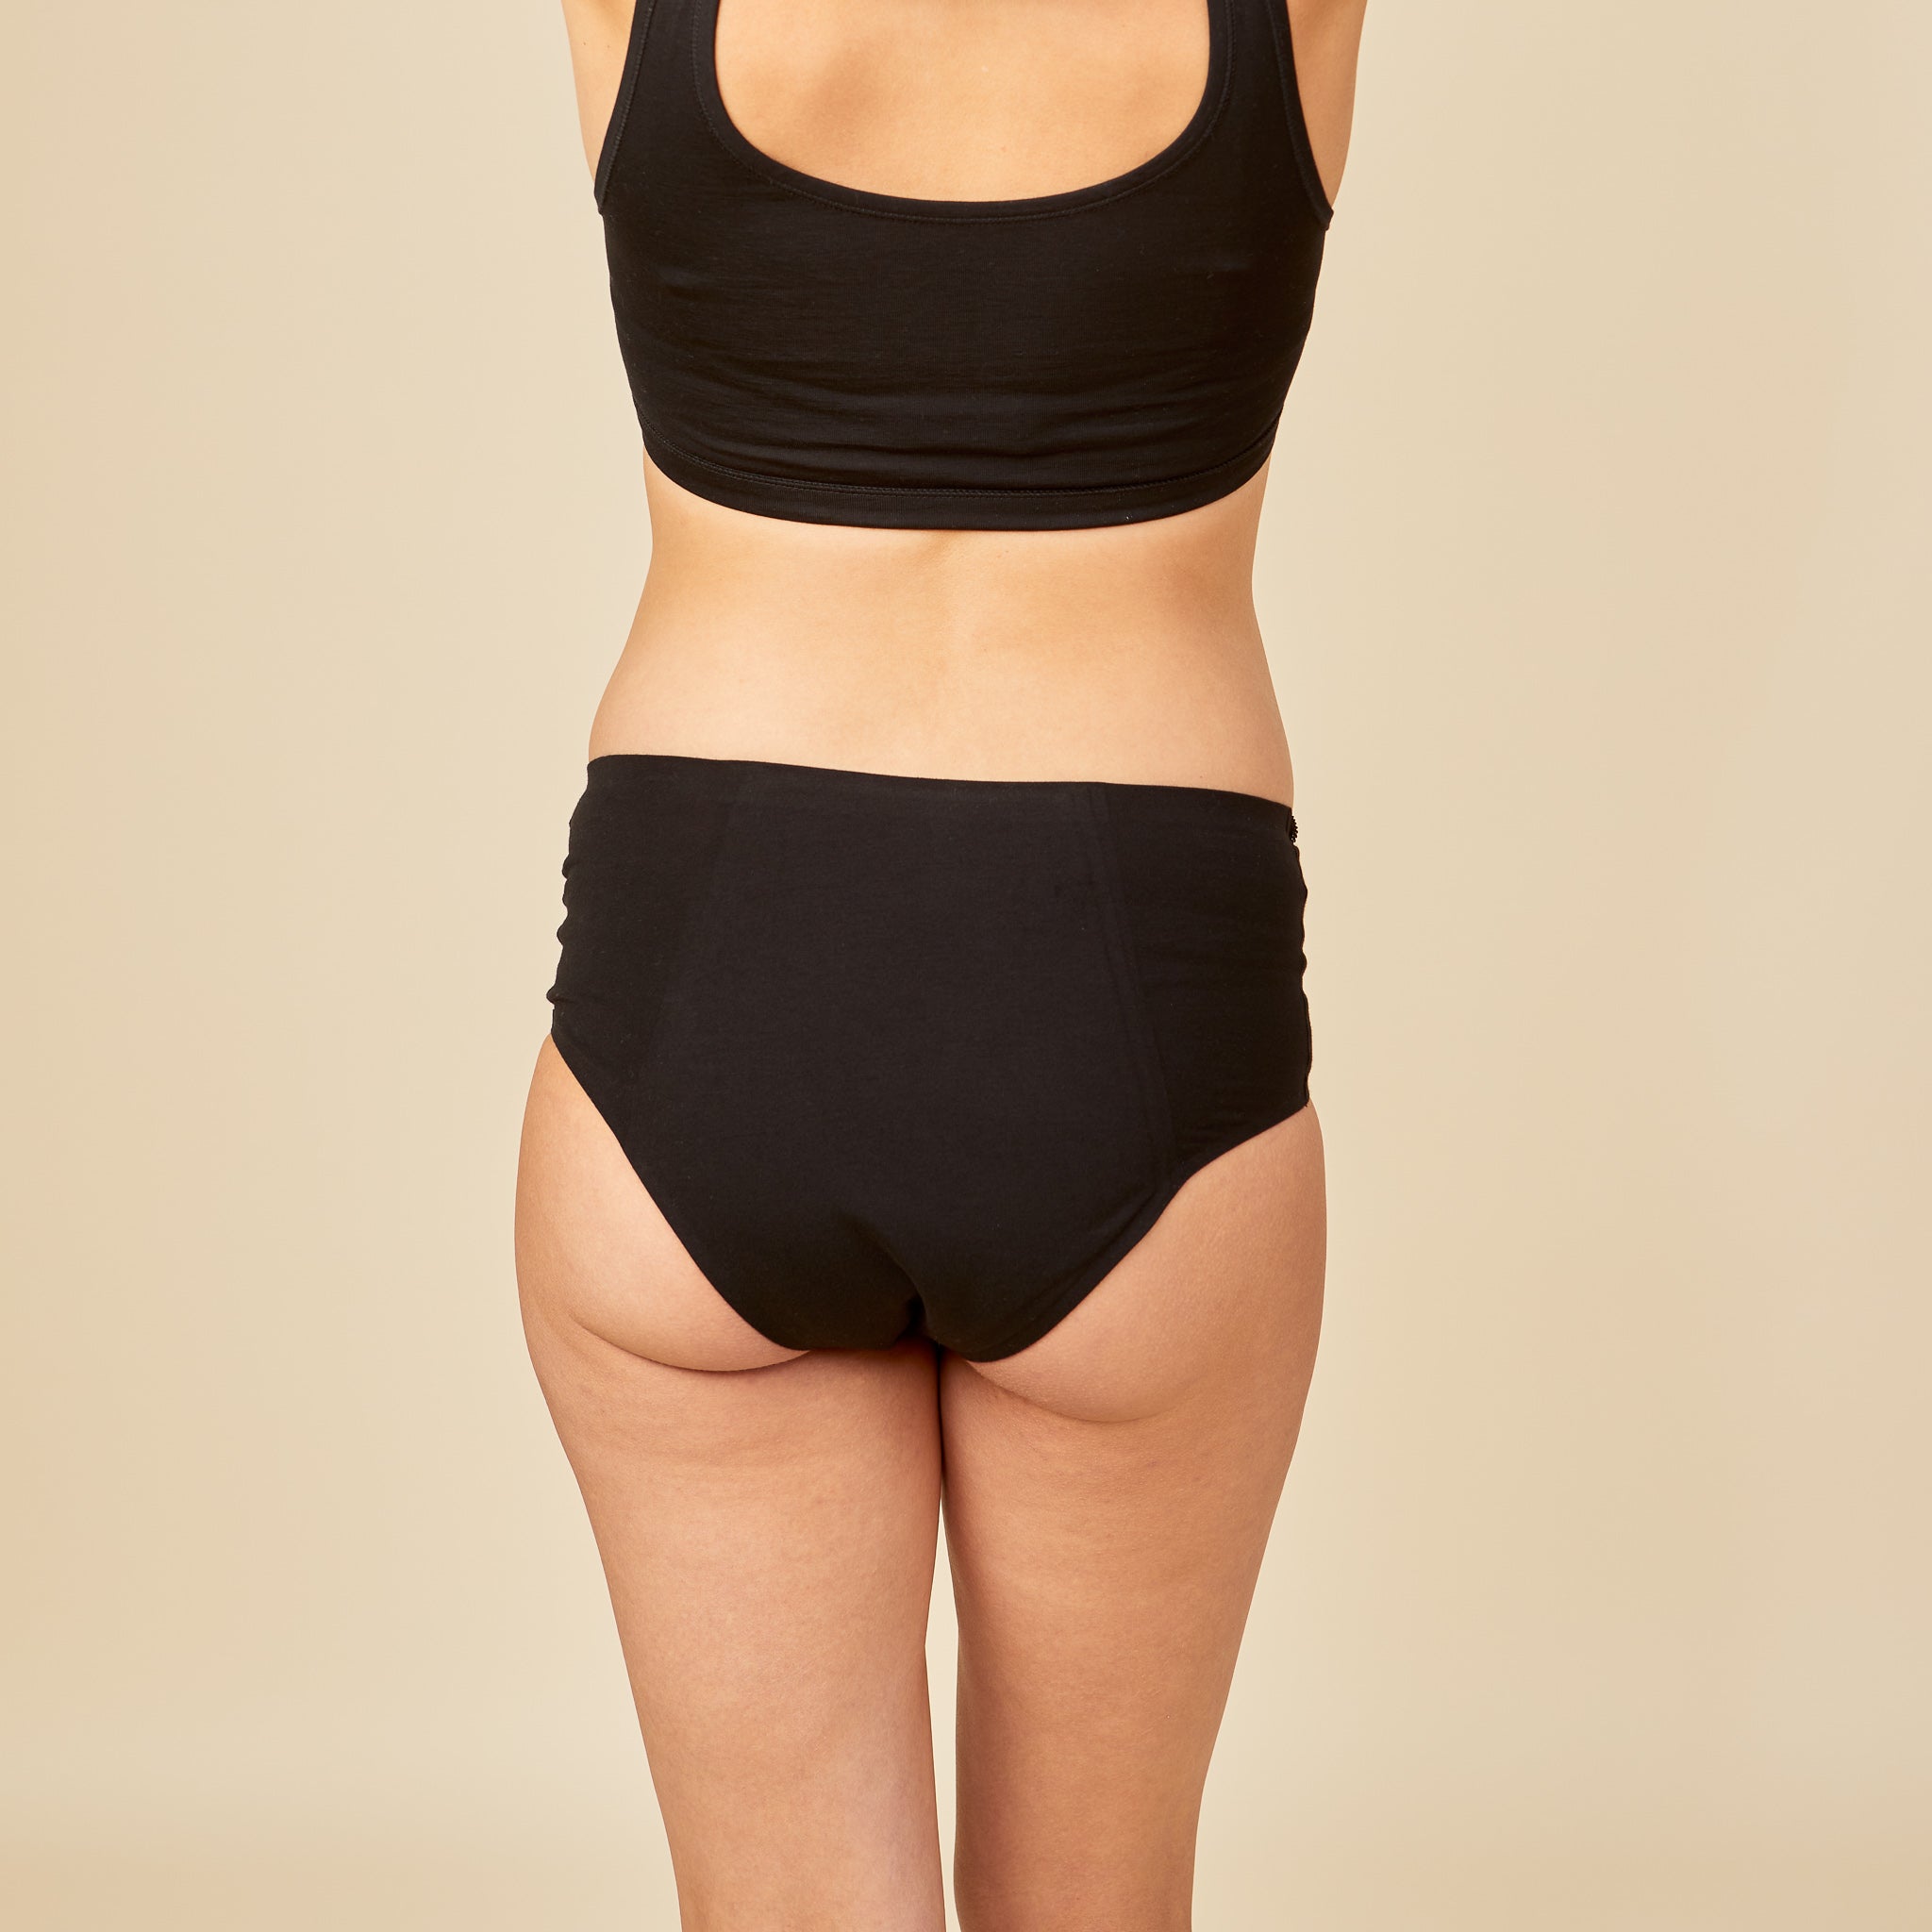 dais maternity absorbent underwear in high waist cut in black. Shown on pregnant model from the back.